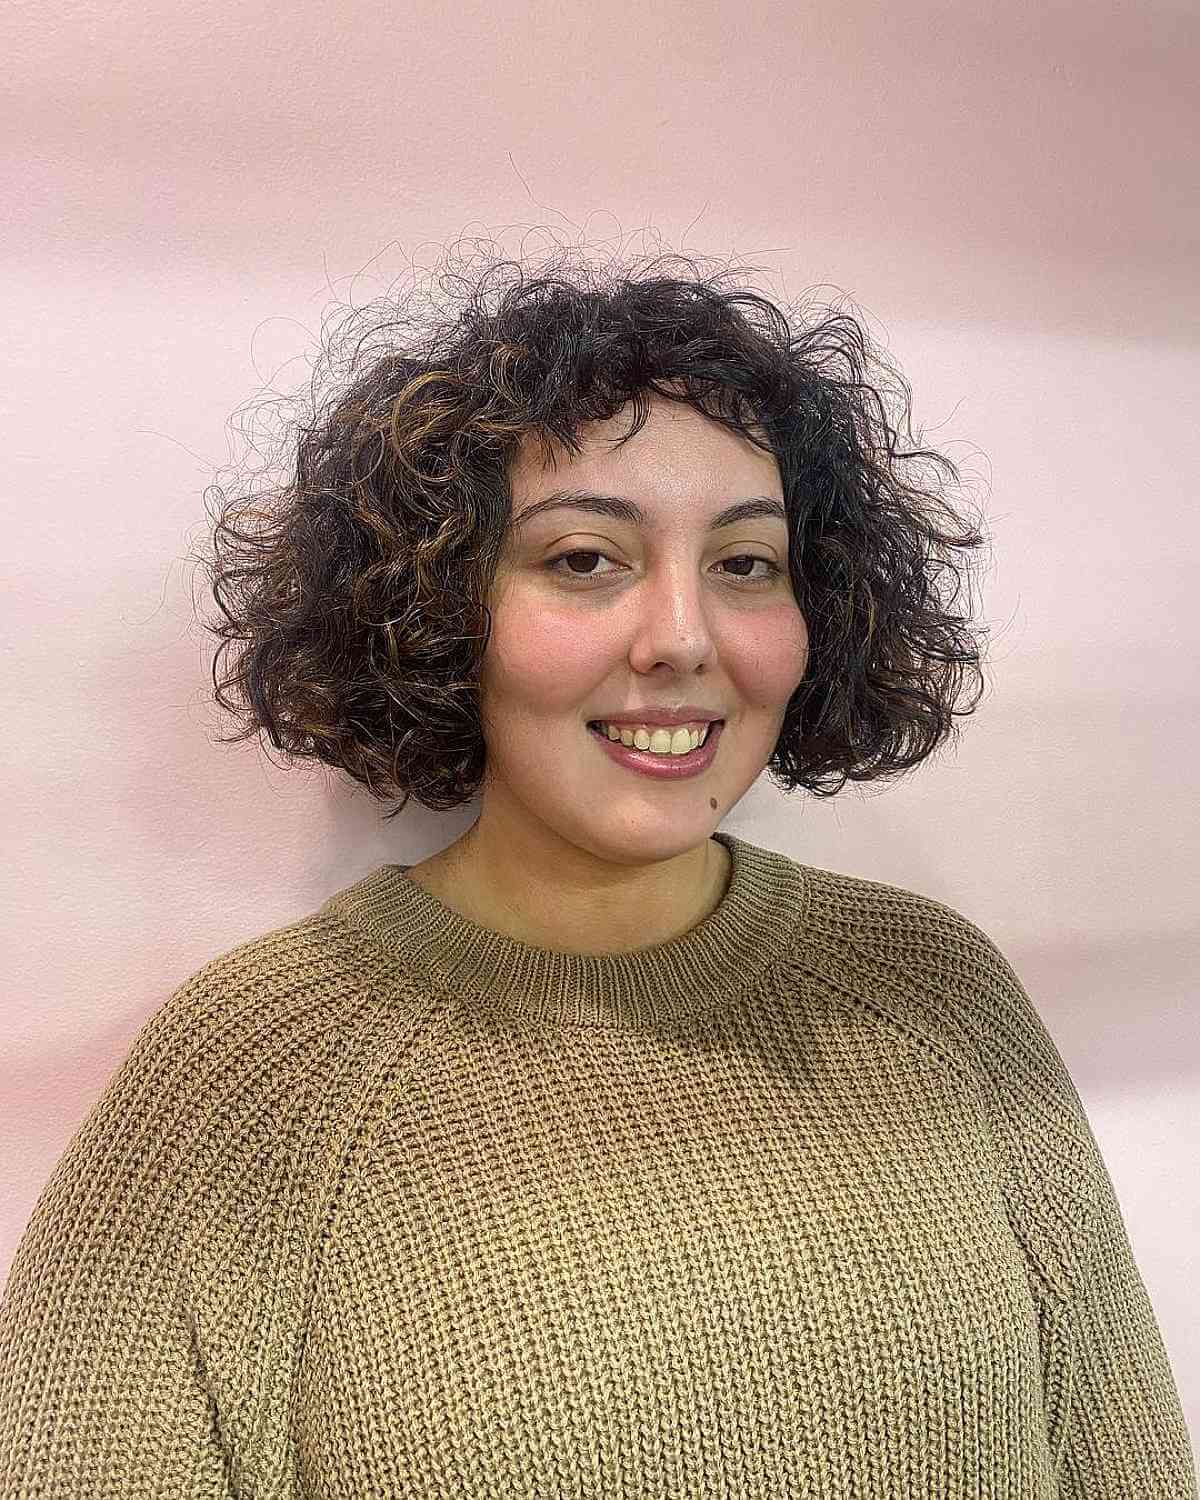 Short Chin-Length Choppy Hair with Frizzy Curls and Micro Bangs